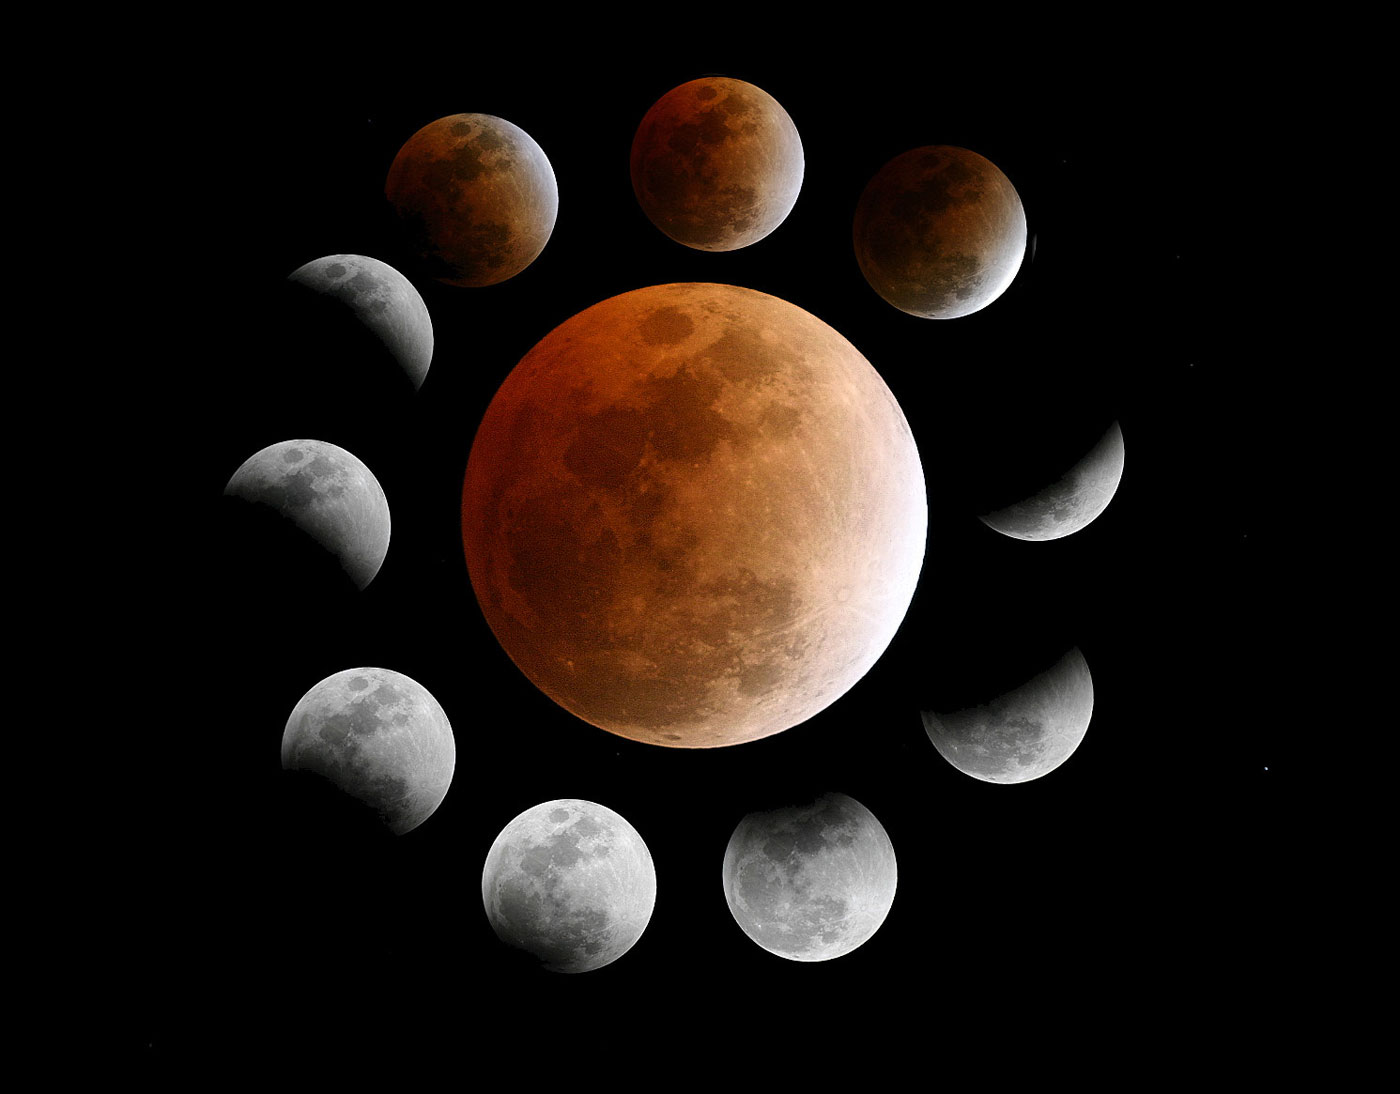 How to view the Super Flower Blood Moon on May 26